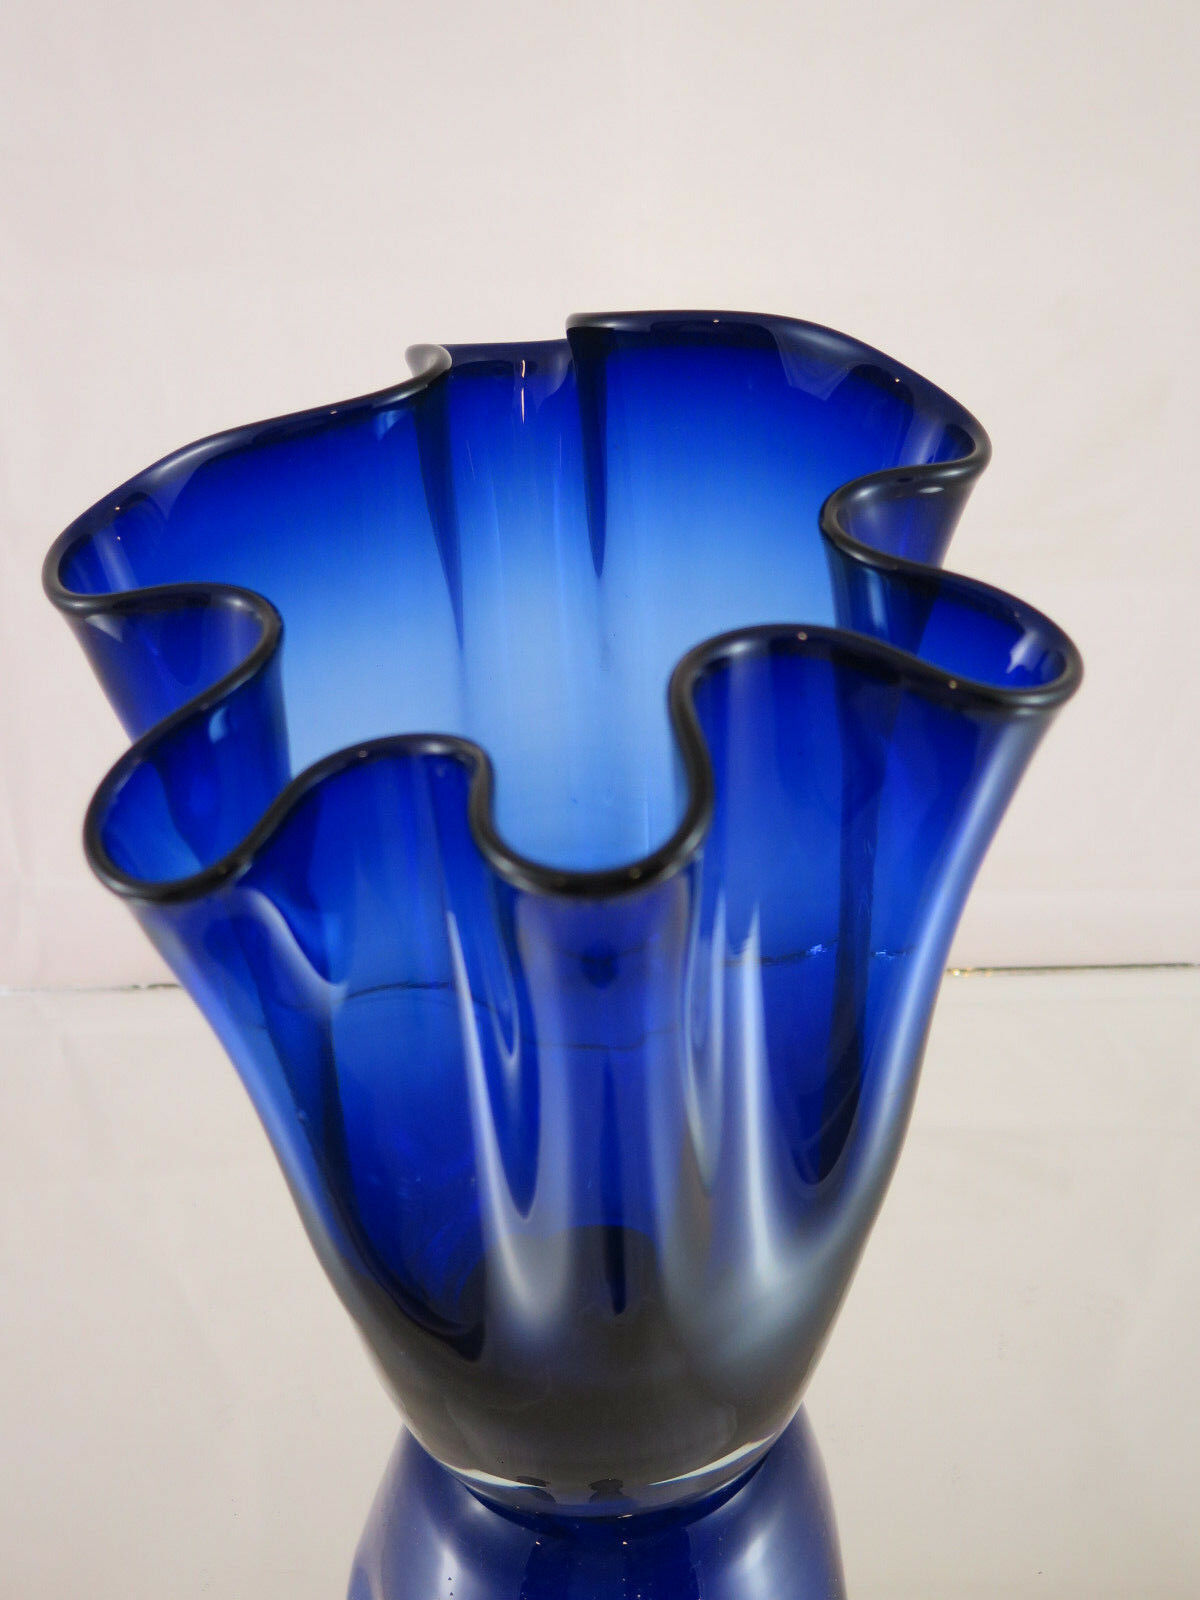 VINTAGE GLASS HANDKERCHIEF VASE BLUE COLOR DESIGN FROM THE SIXTY AND SEVENTIES R54 